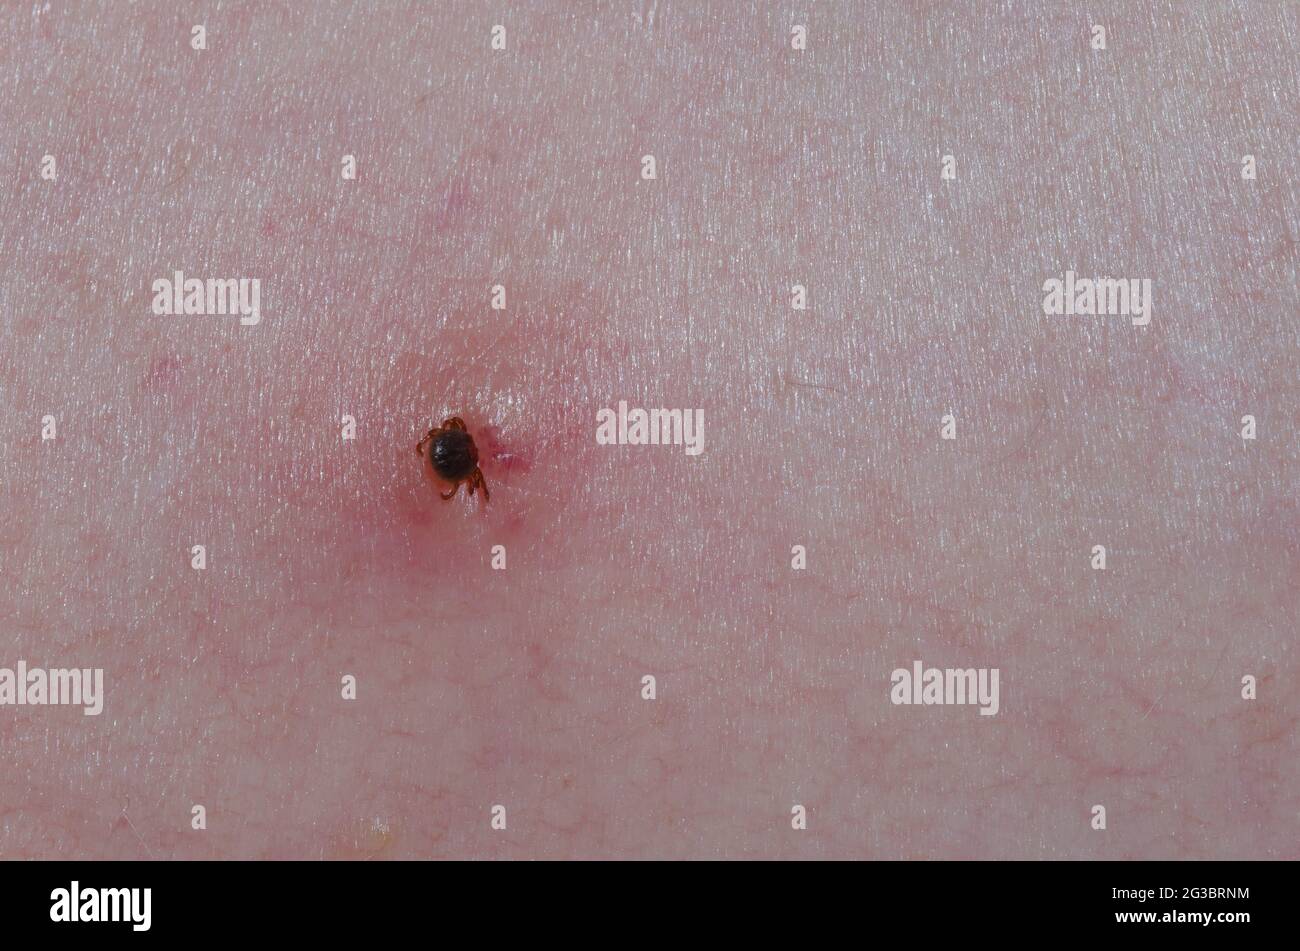 Lone Star Tick, Amblyomma americanum, nymph attached to human skin Stock Photo